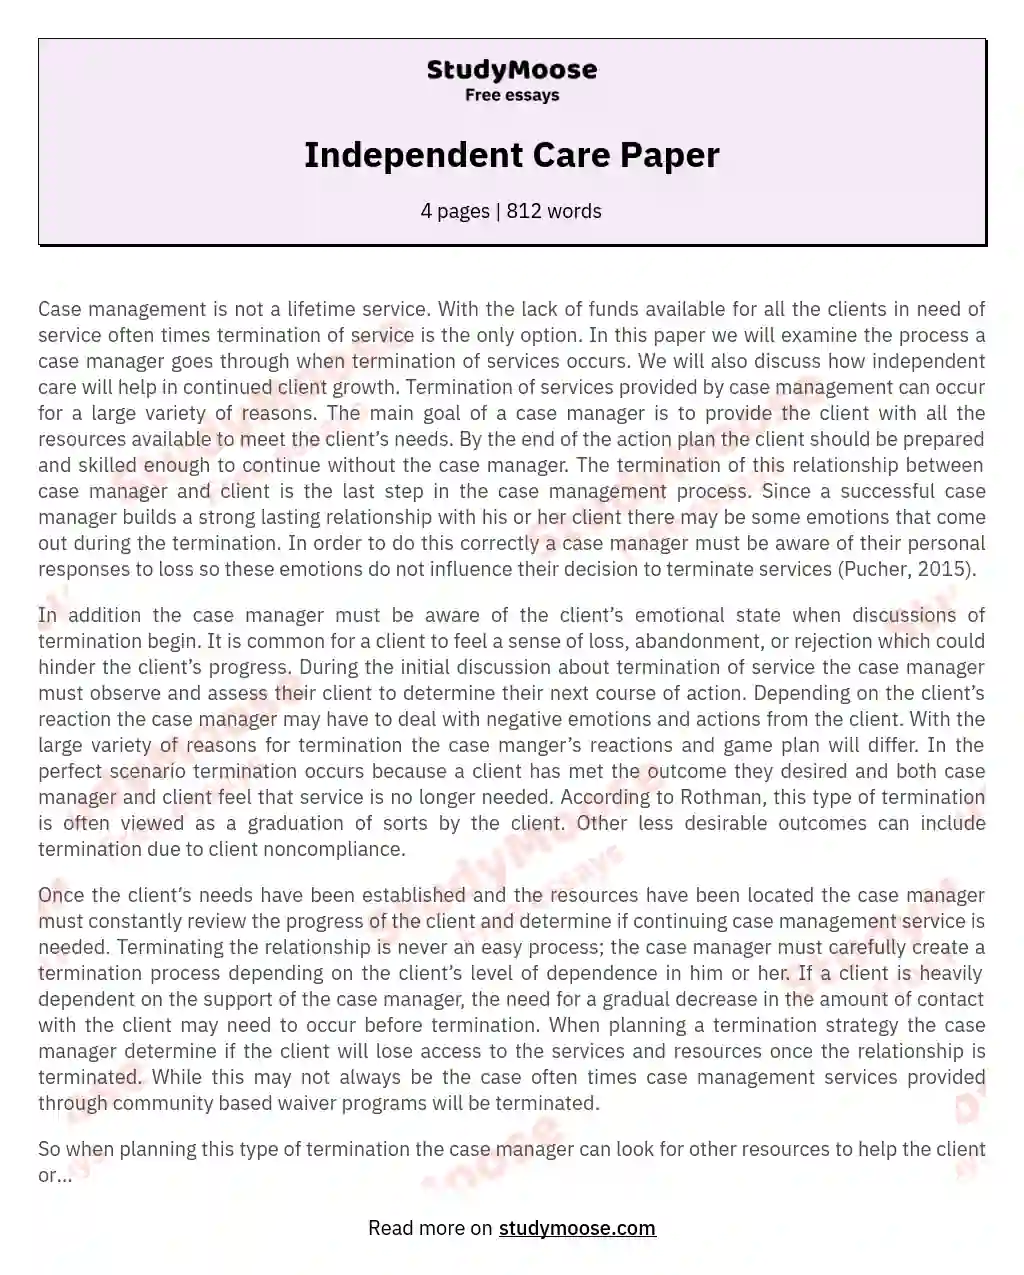 Independent Care Paper